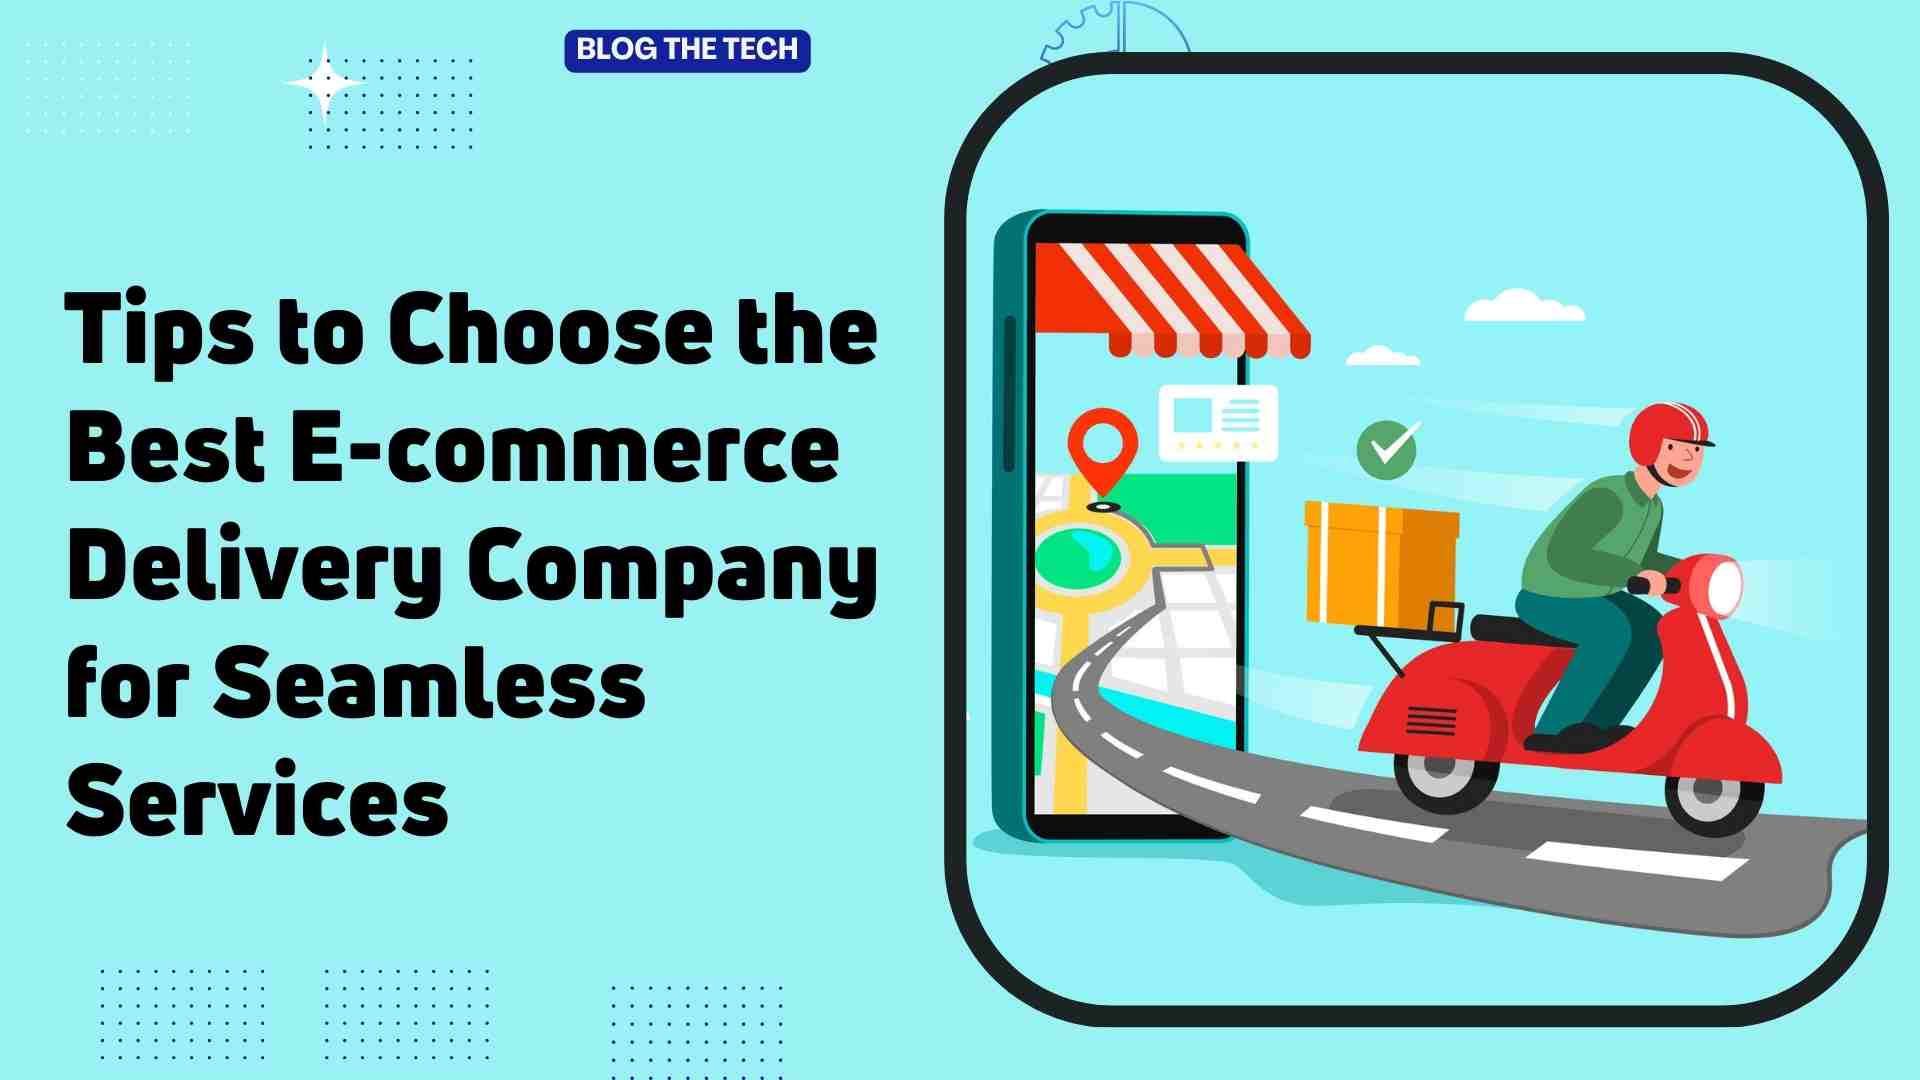 Tips to Choose the Best E-commerce Delivery Company for Seamless Services